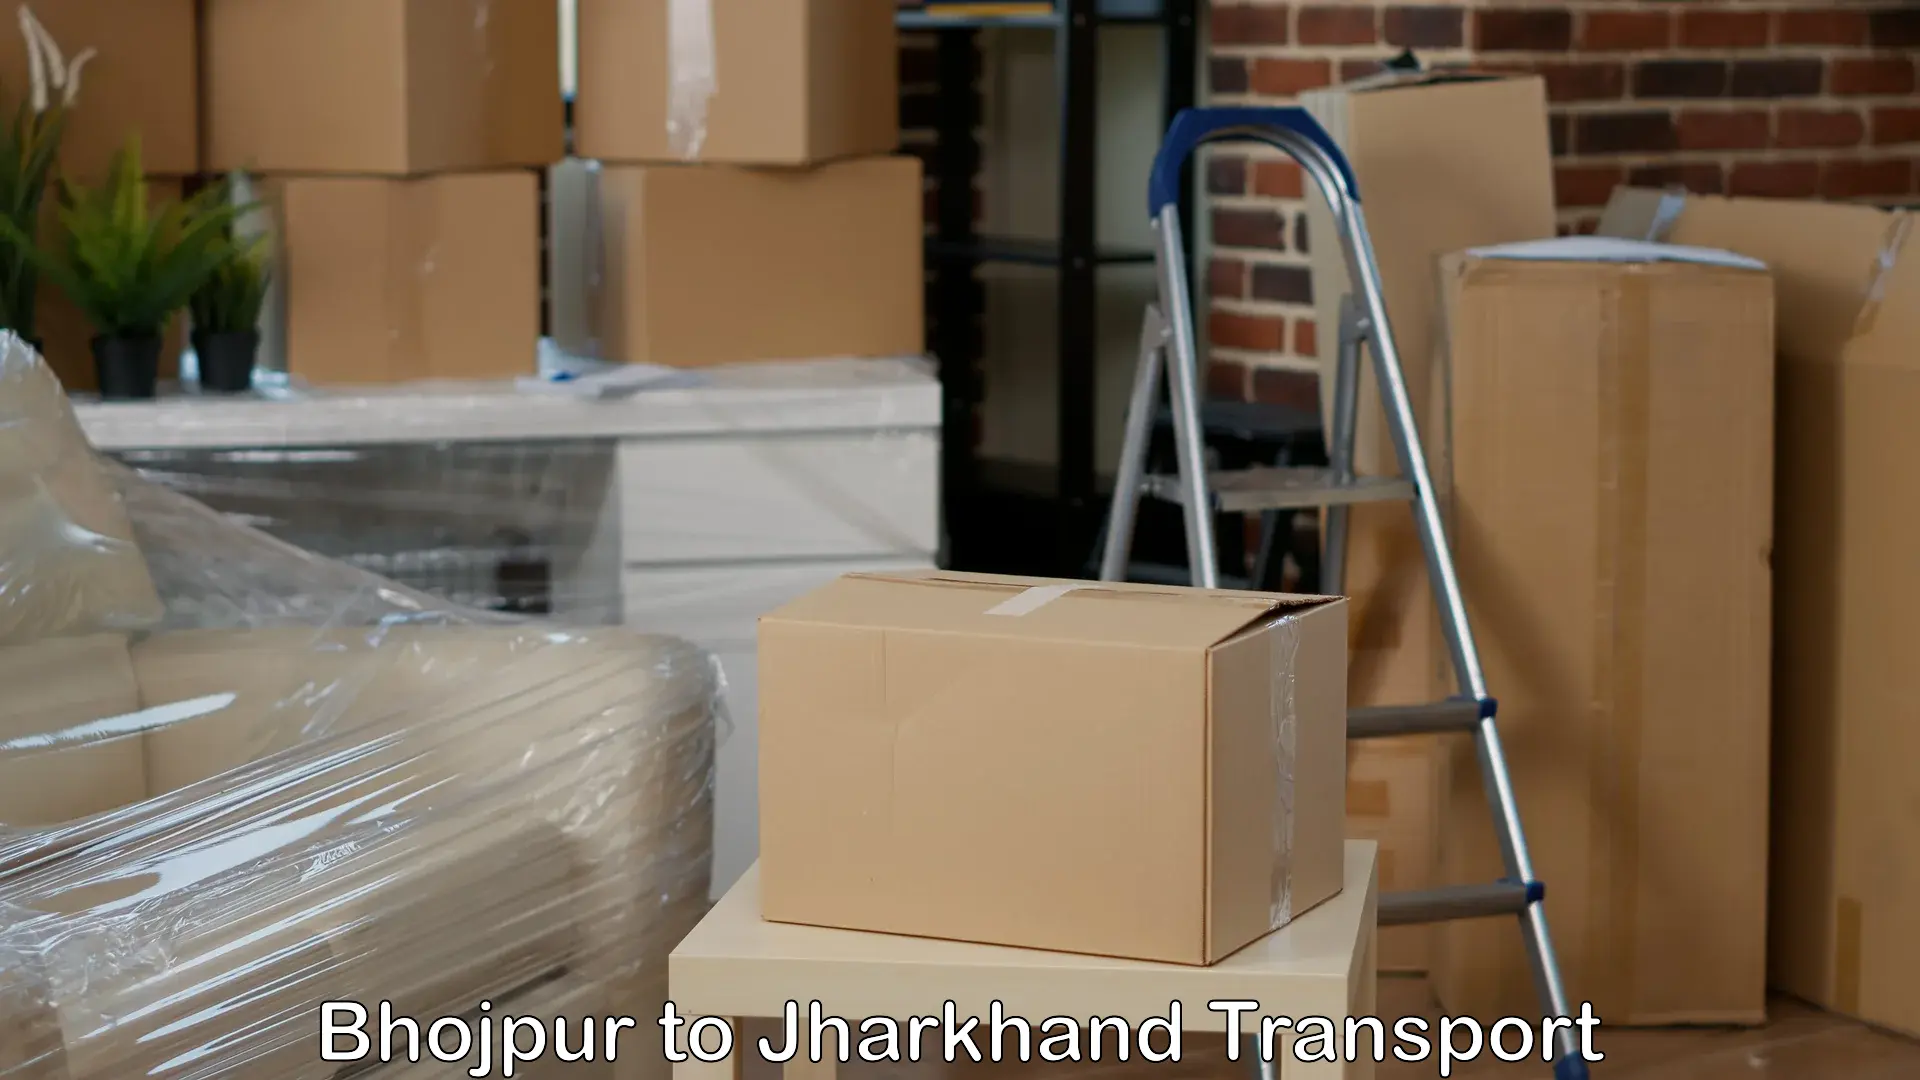 Delivery service Bhojpur to Jamshedpur